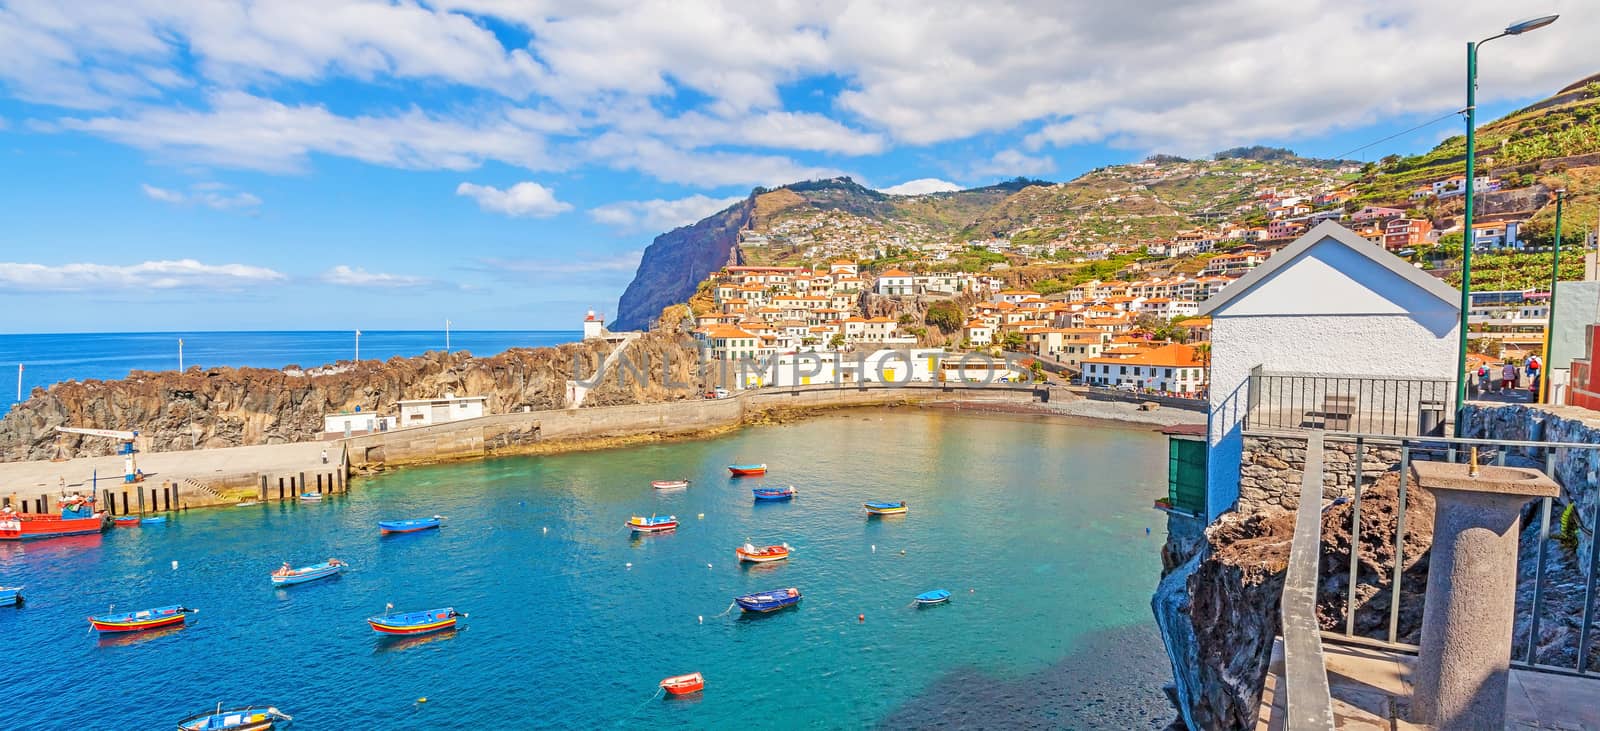 Camara de Lobos, Madeira - June 8, 2013: Panorama of Port / bay with fishing boats. The village is typical for its cat shark drying under the sun.